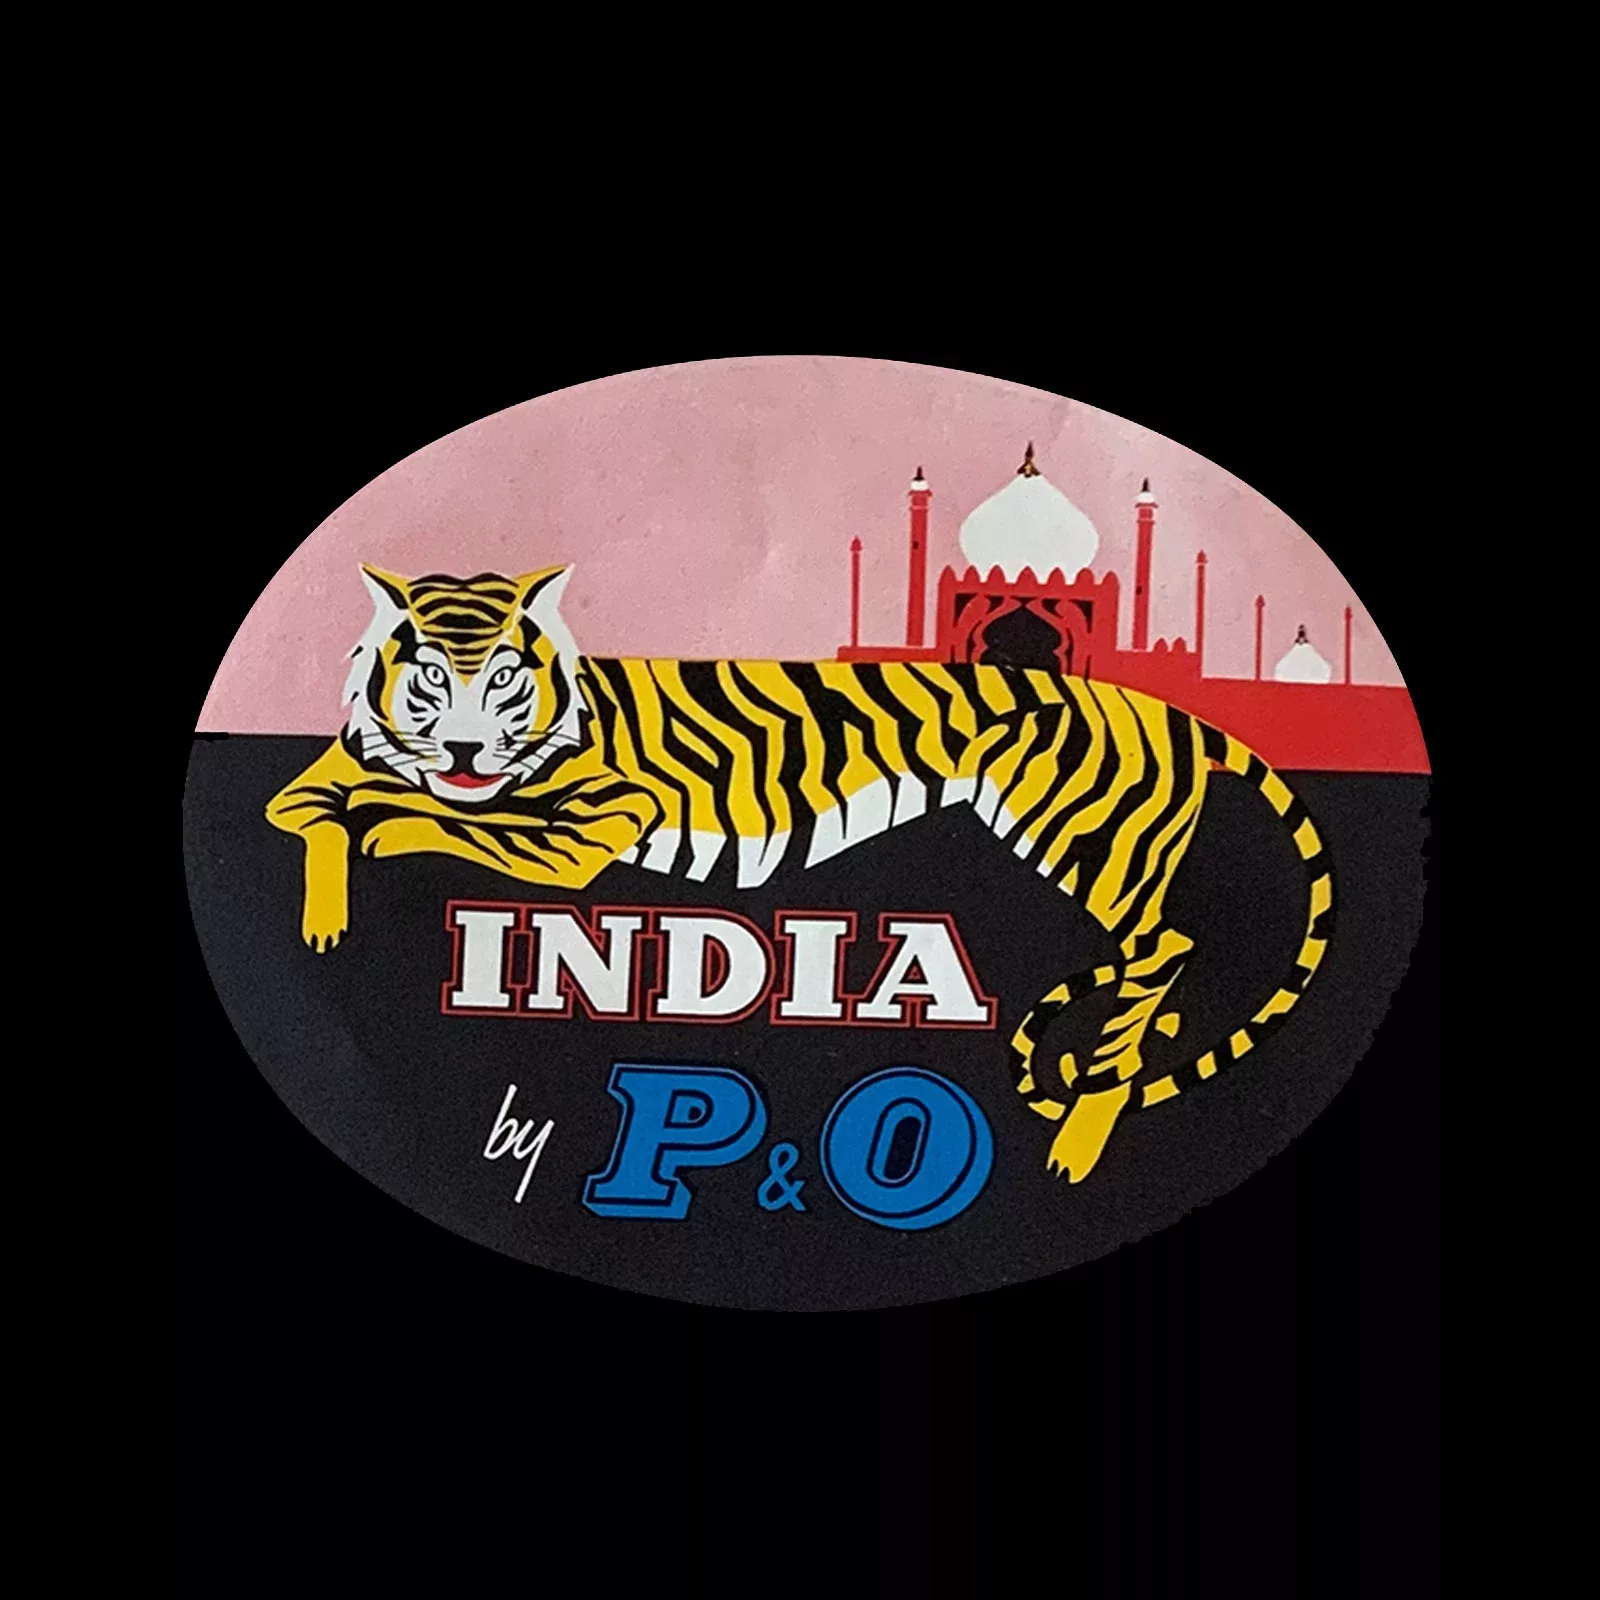 India by P&O Luggage Label, 1950s